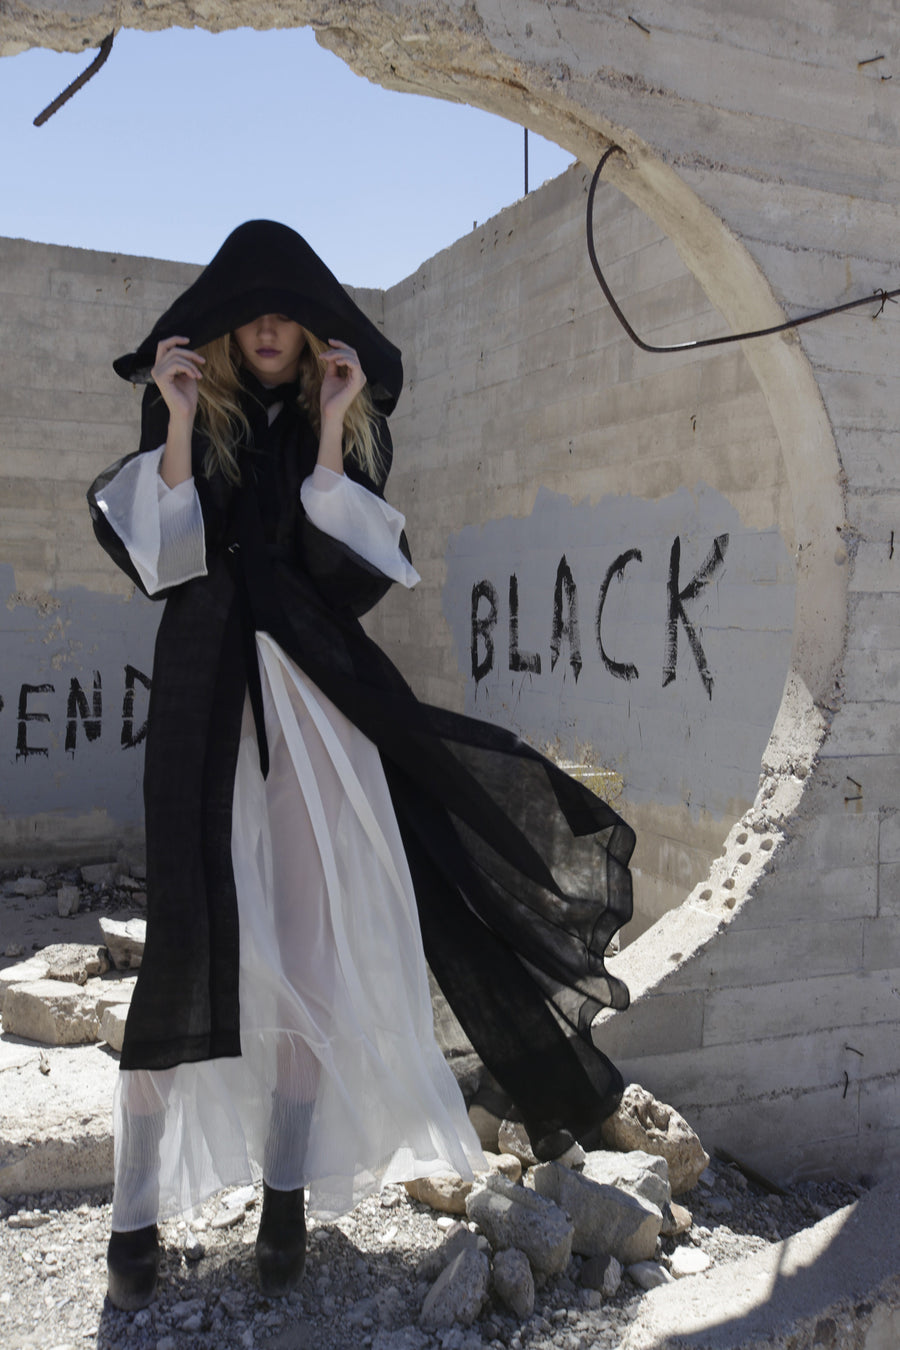 Maggie Laine IMG model Wendy Nichol New York Clothing Designer Handmade in NYC New York City SS17 Fashion Runway Show Signals to the Mothership Made to Order Custom Tailoring Made to Measure Death Valley Black Sheer Hood Hooded Cape Cloak Coat Belle Sleeves Long Train Oversized Hood White Sheer Apron Cross Tie Pleated Sleeves Dress Victorian Edwardian Gothic Goth Pagan Witch High Priestess Sorceress Magician Wizard 